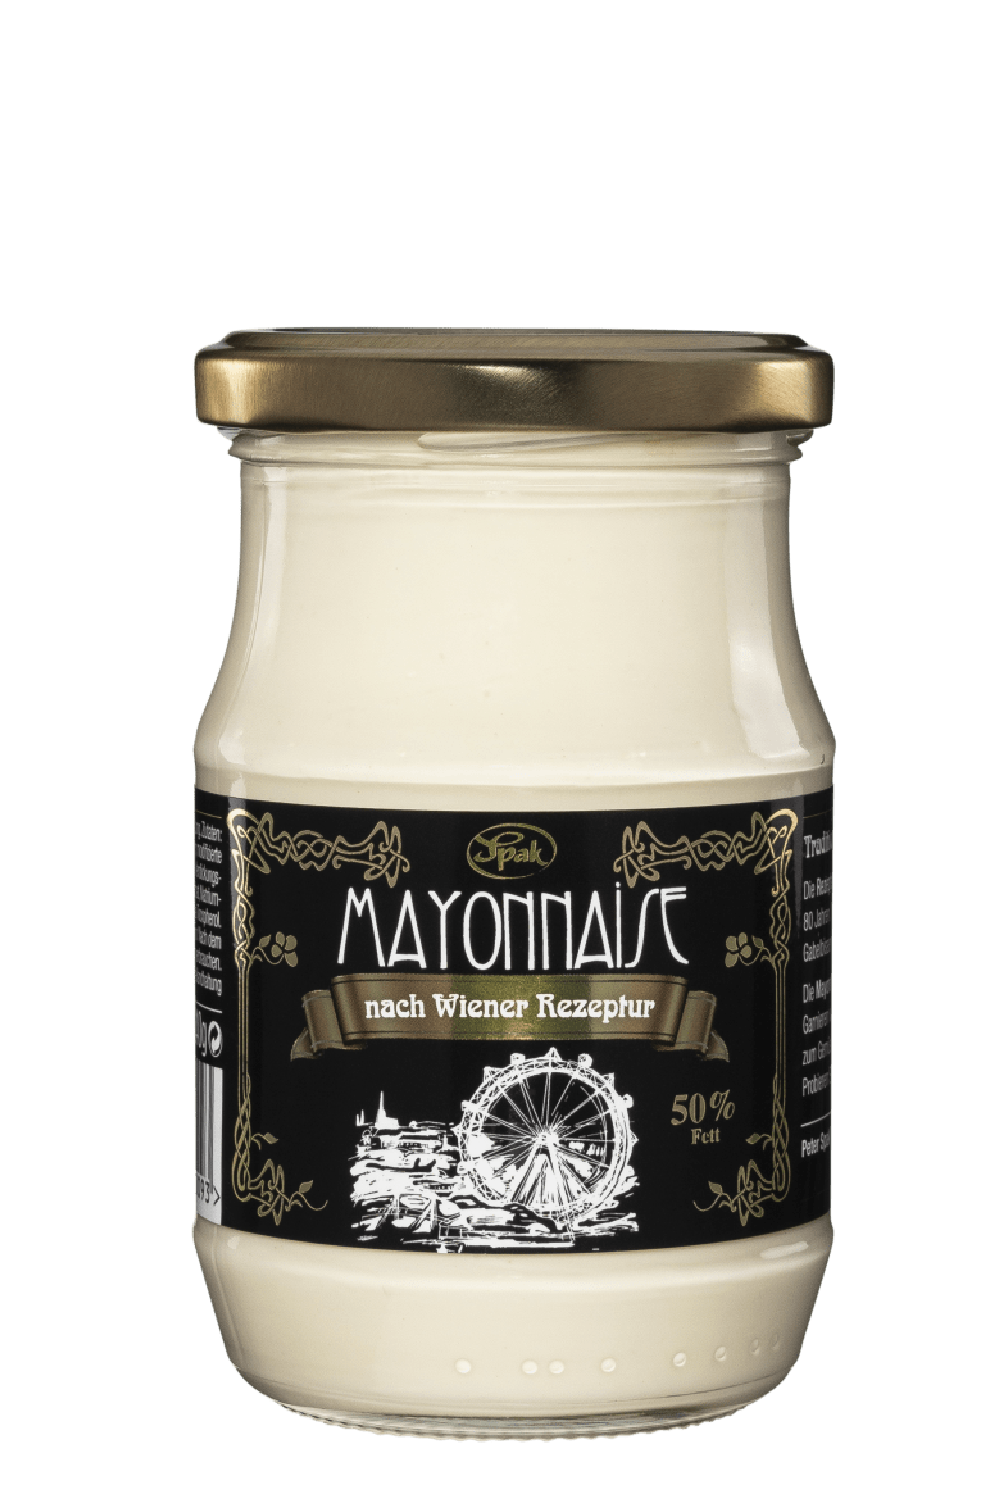 spak-mayonnaise-50-fat-with-free-range-eggs-according-to-vienna